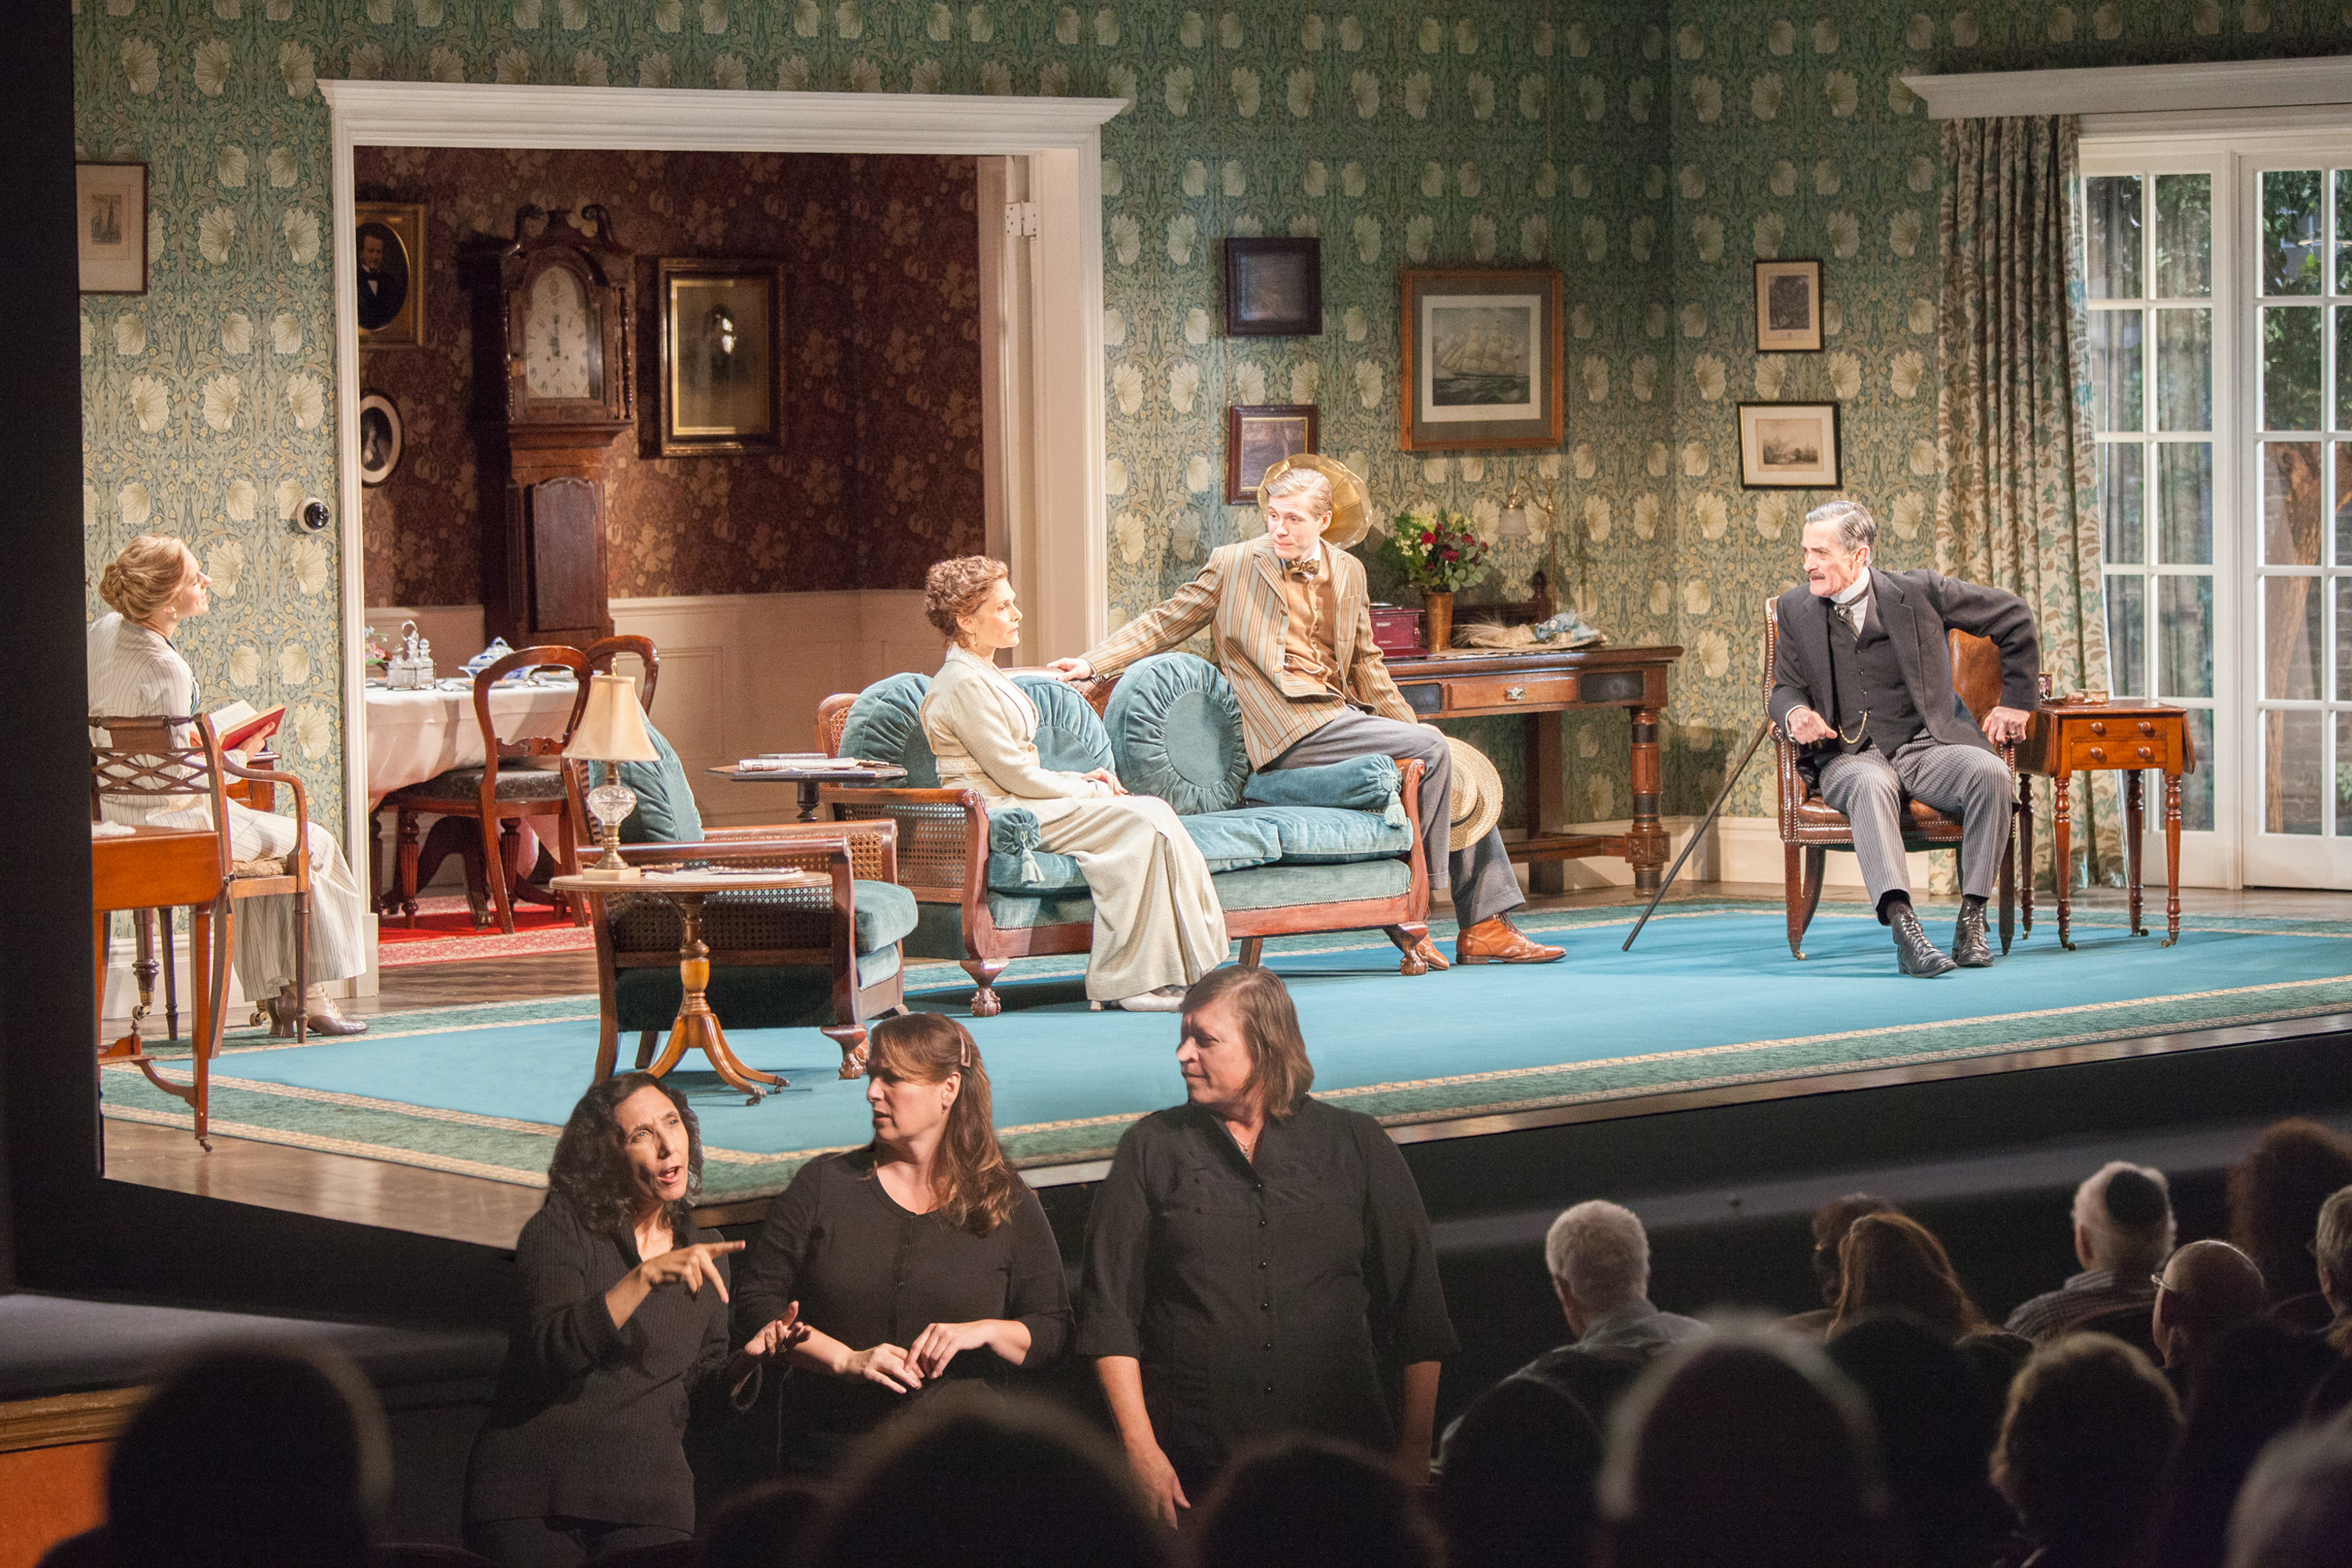 An ASL interpreted performance of The Winslow Boy by Roundabout Theatre.